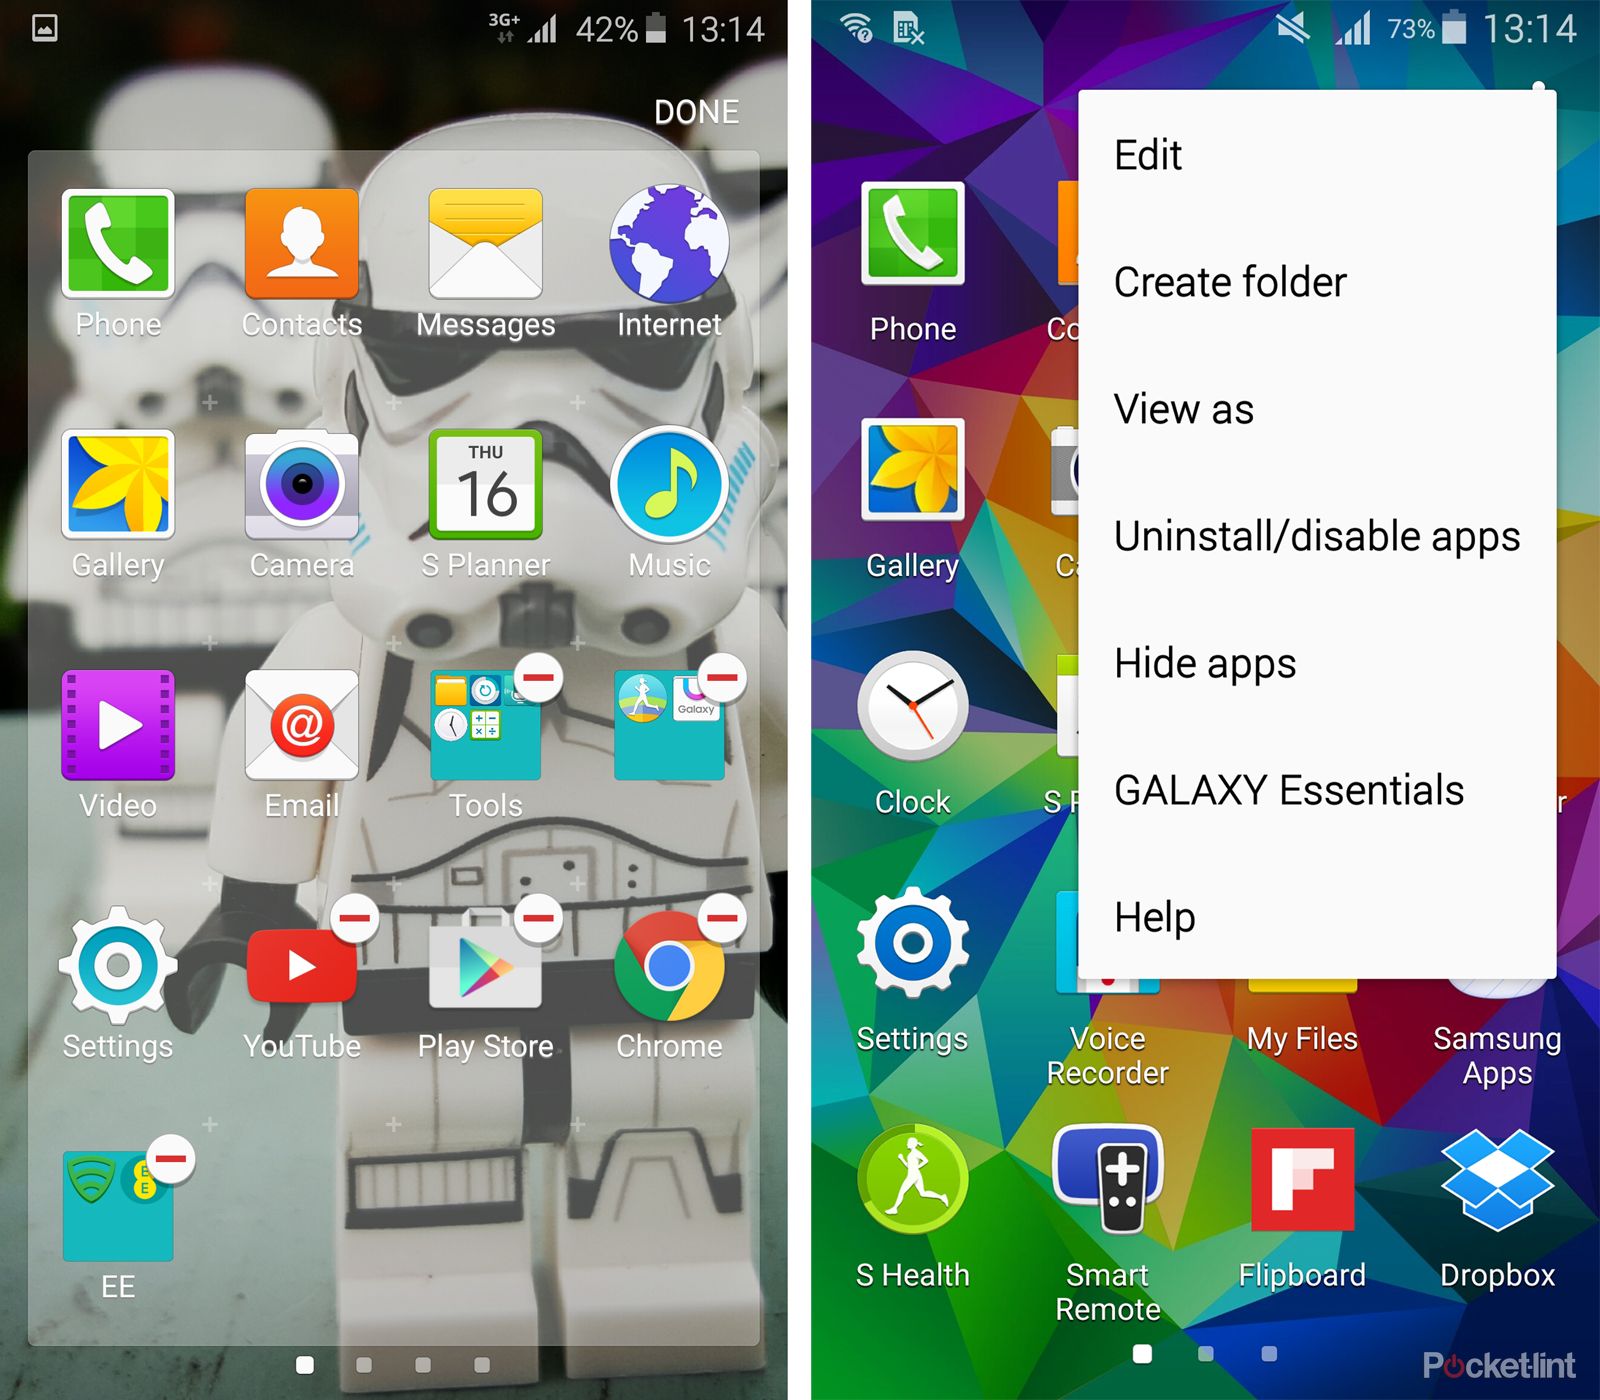 samsung touchwiz review a deep dive into the samsung galaxy s6 software image 3